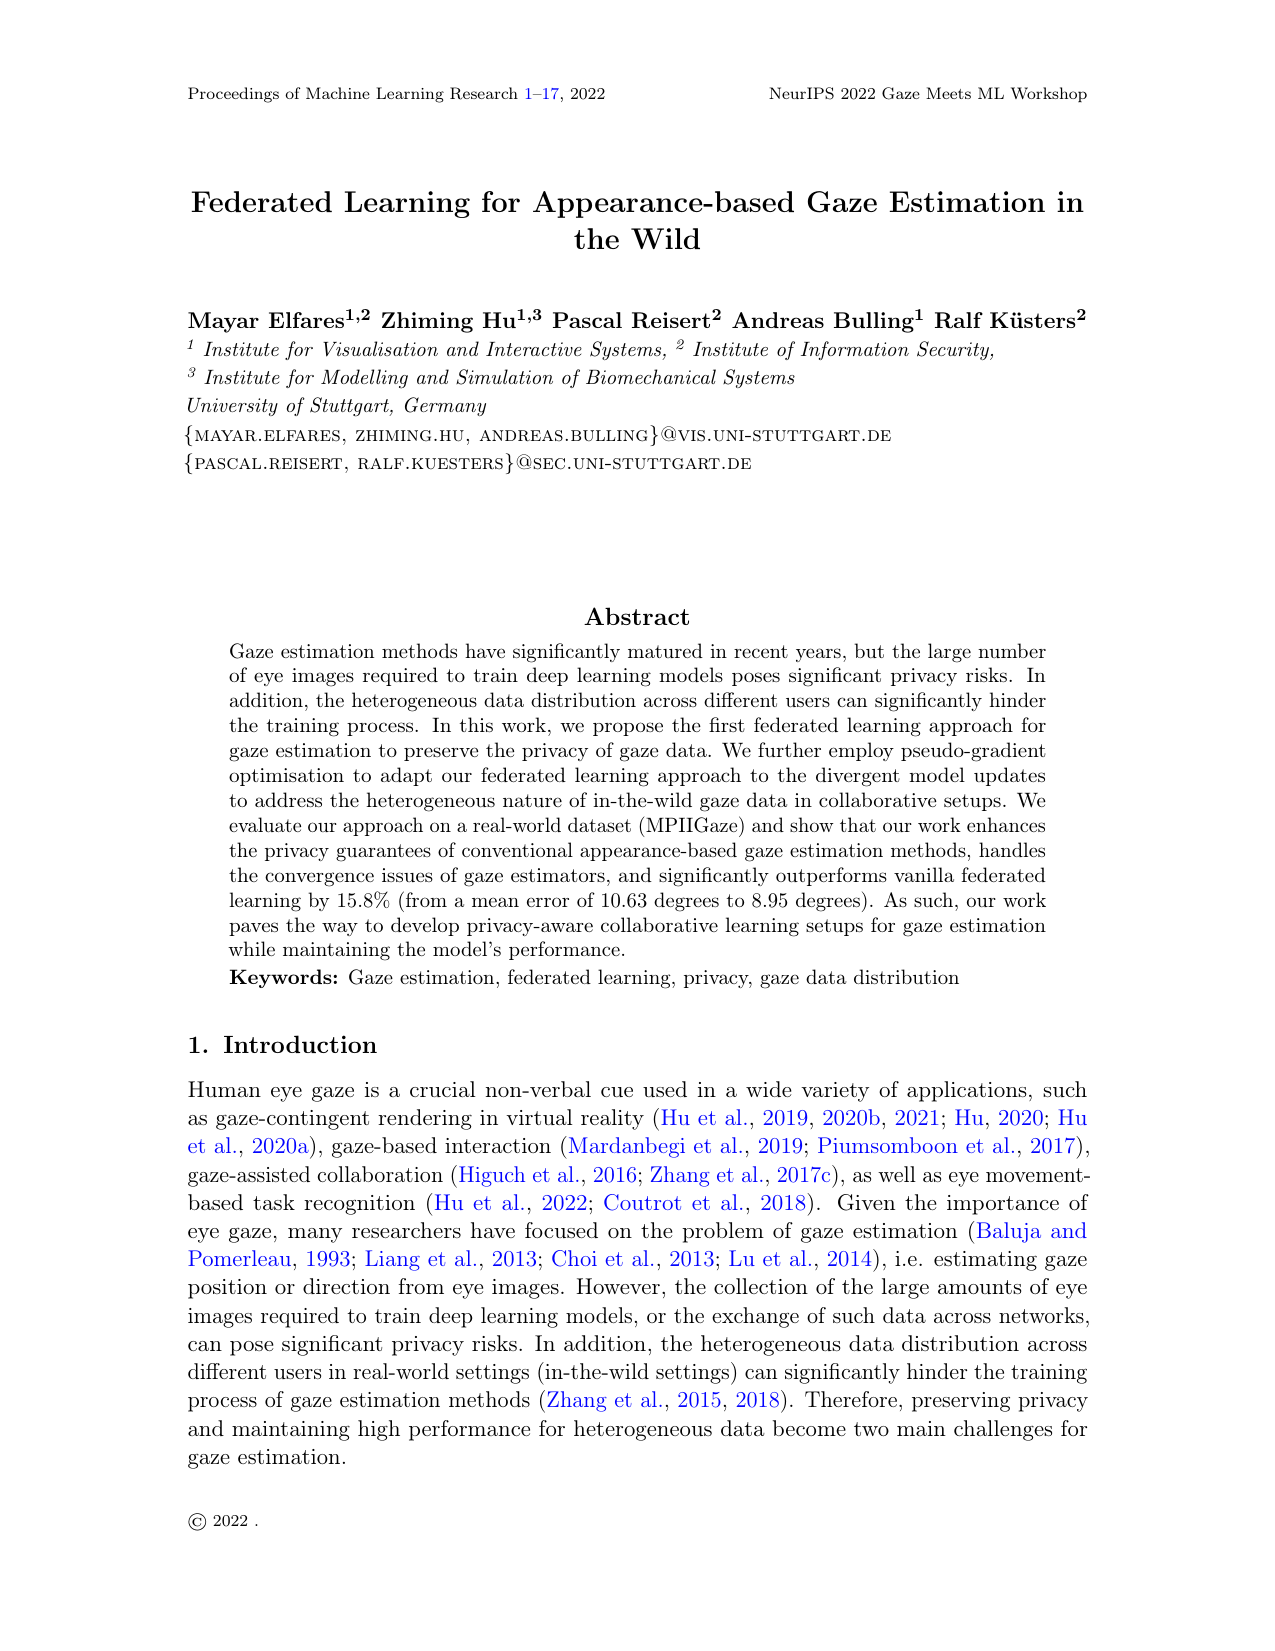 Federated Learning for Appearance-based Gaze Estimation in the Wild